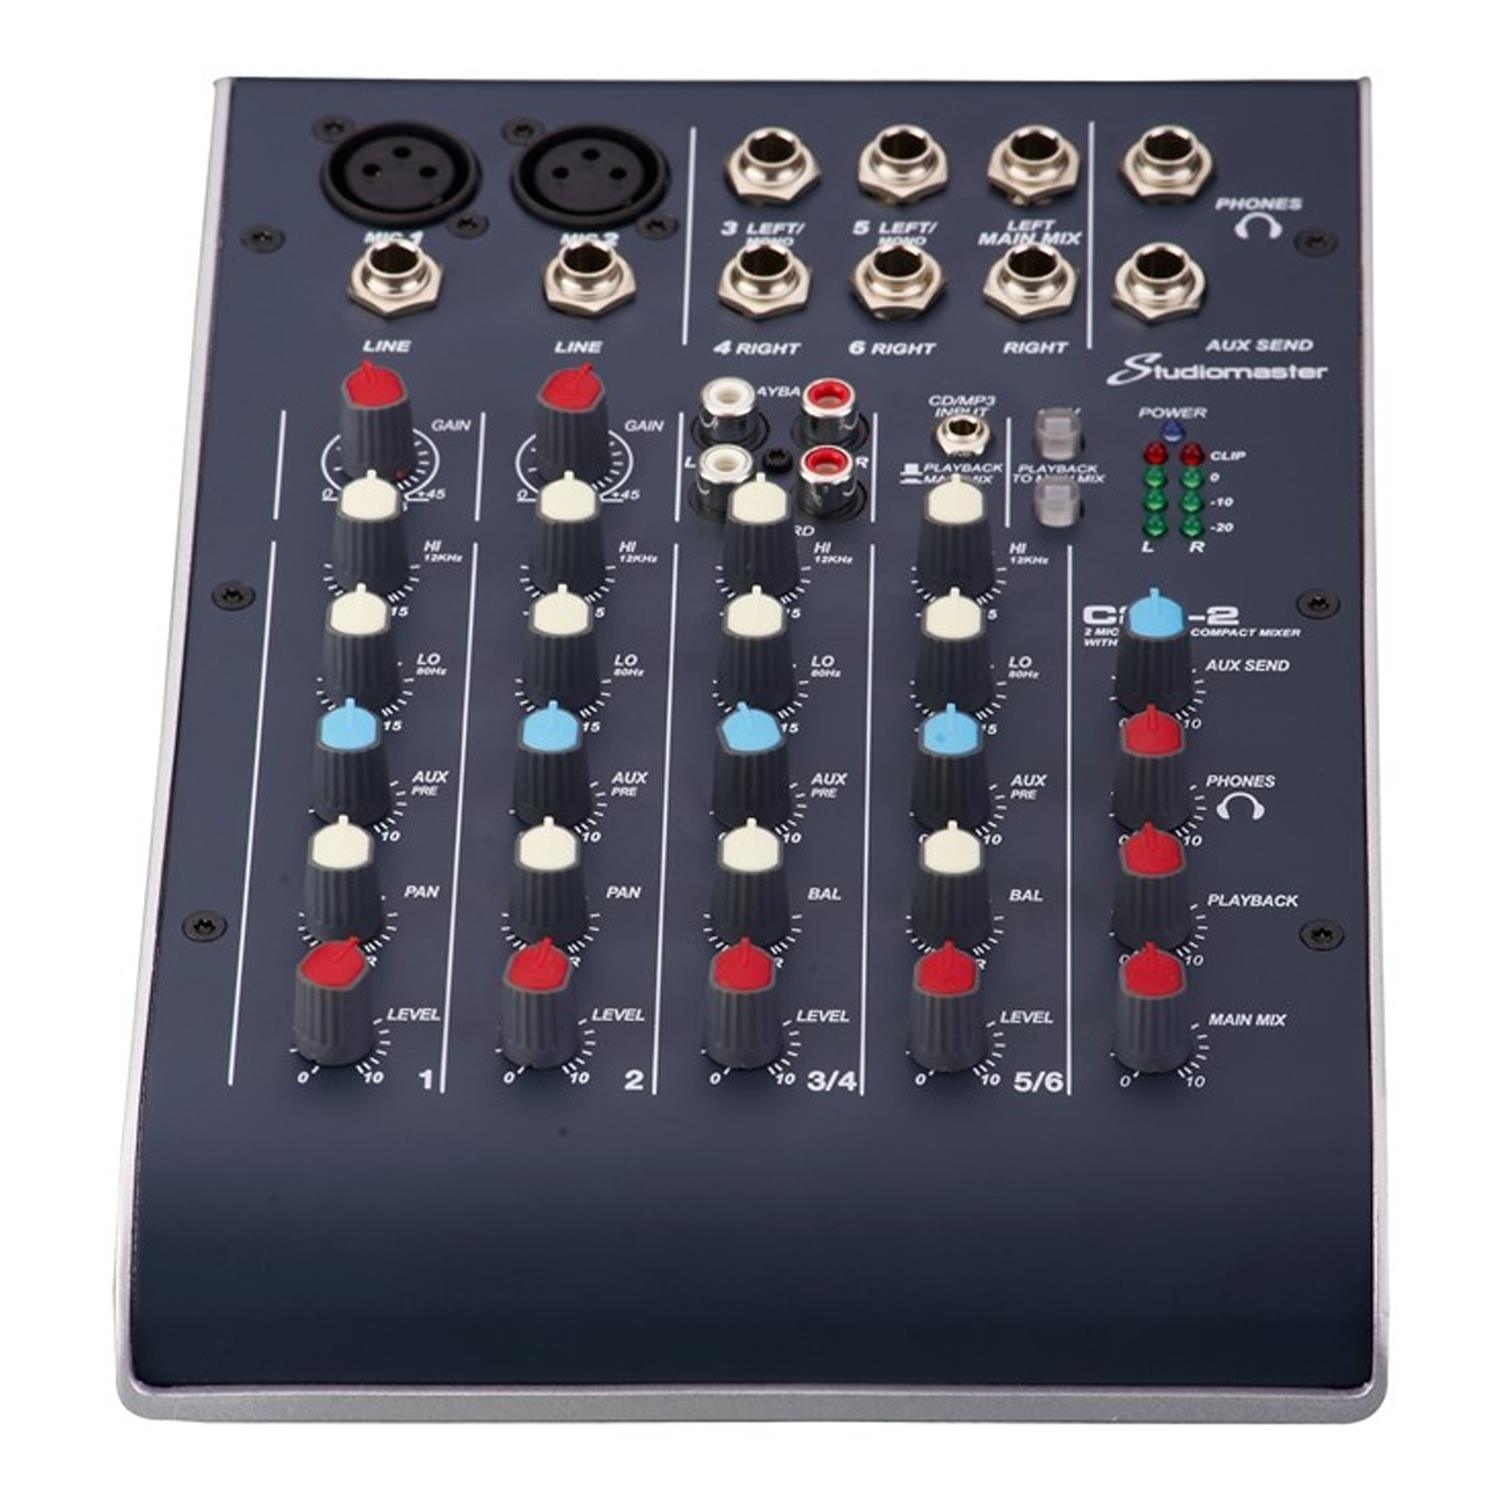 Studiomaster C2S-2 2 Channel Compact USB Mixer - DY Pro Audio